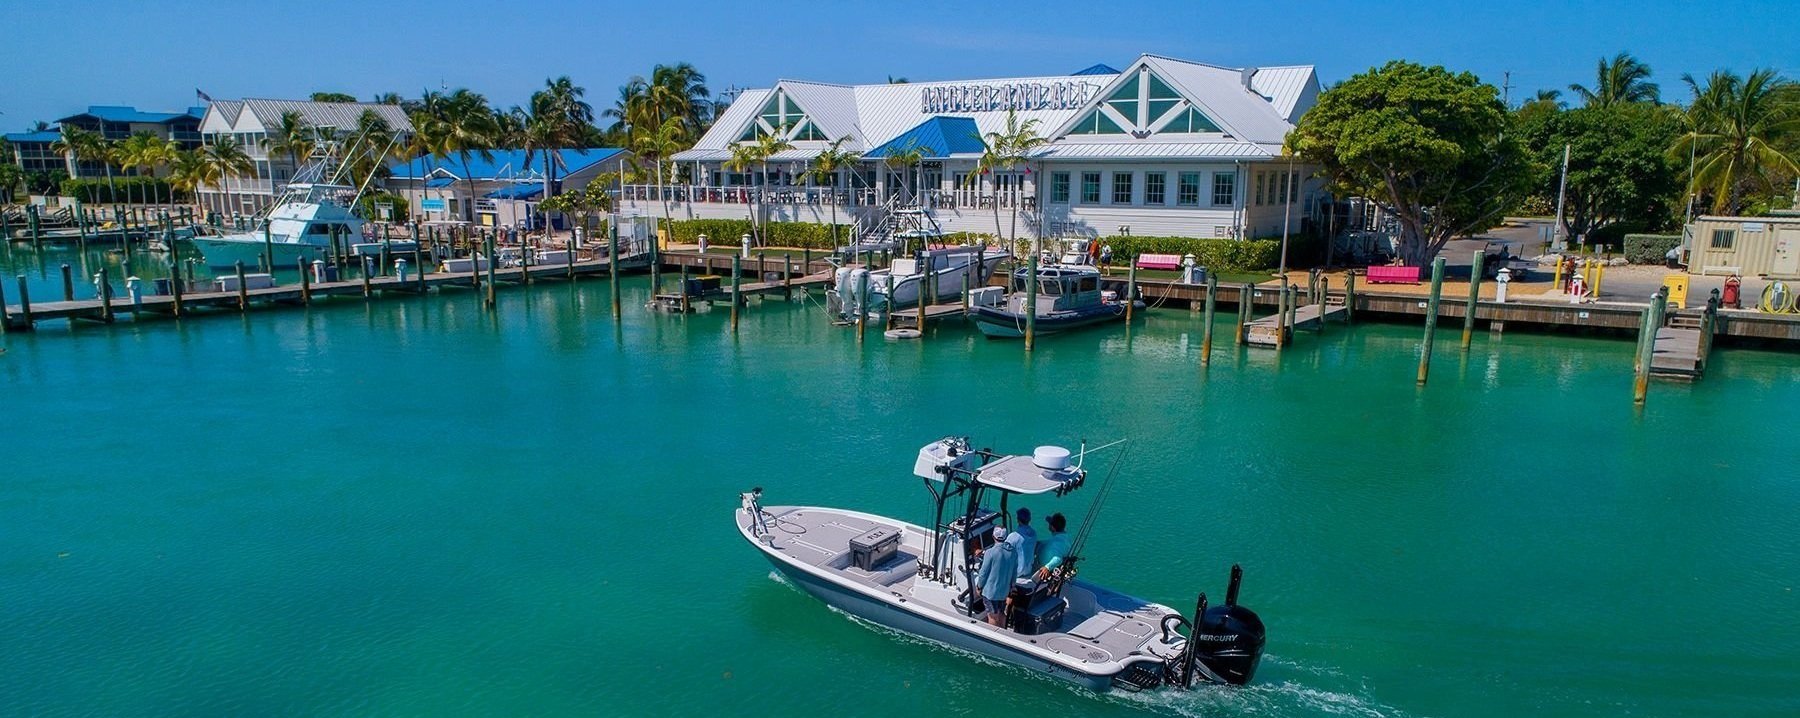   Hawks Cay Resort   Find what lures you   Visit Website  